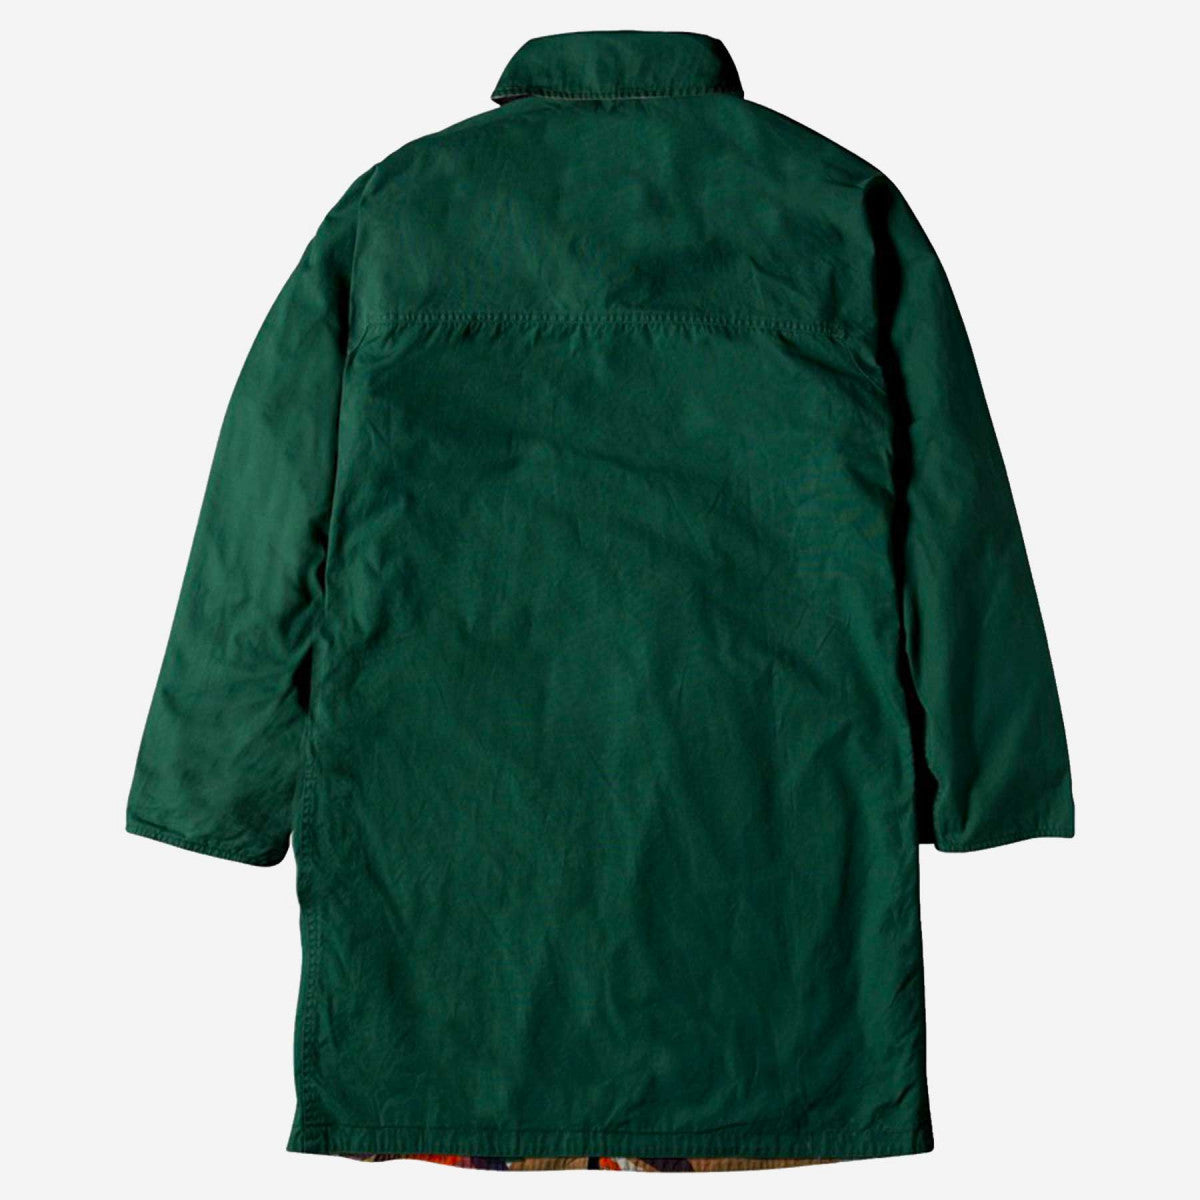 Element X Nigel Cabourn Murray Long Reversible - Mildblend Supply Co